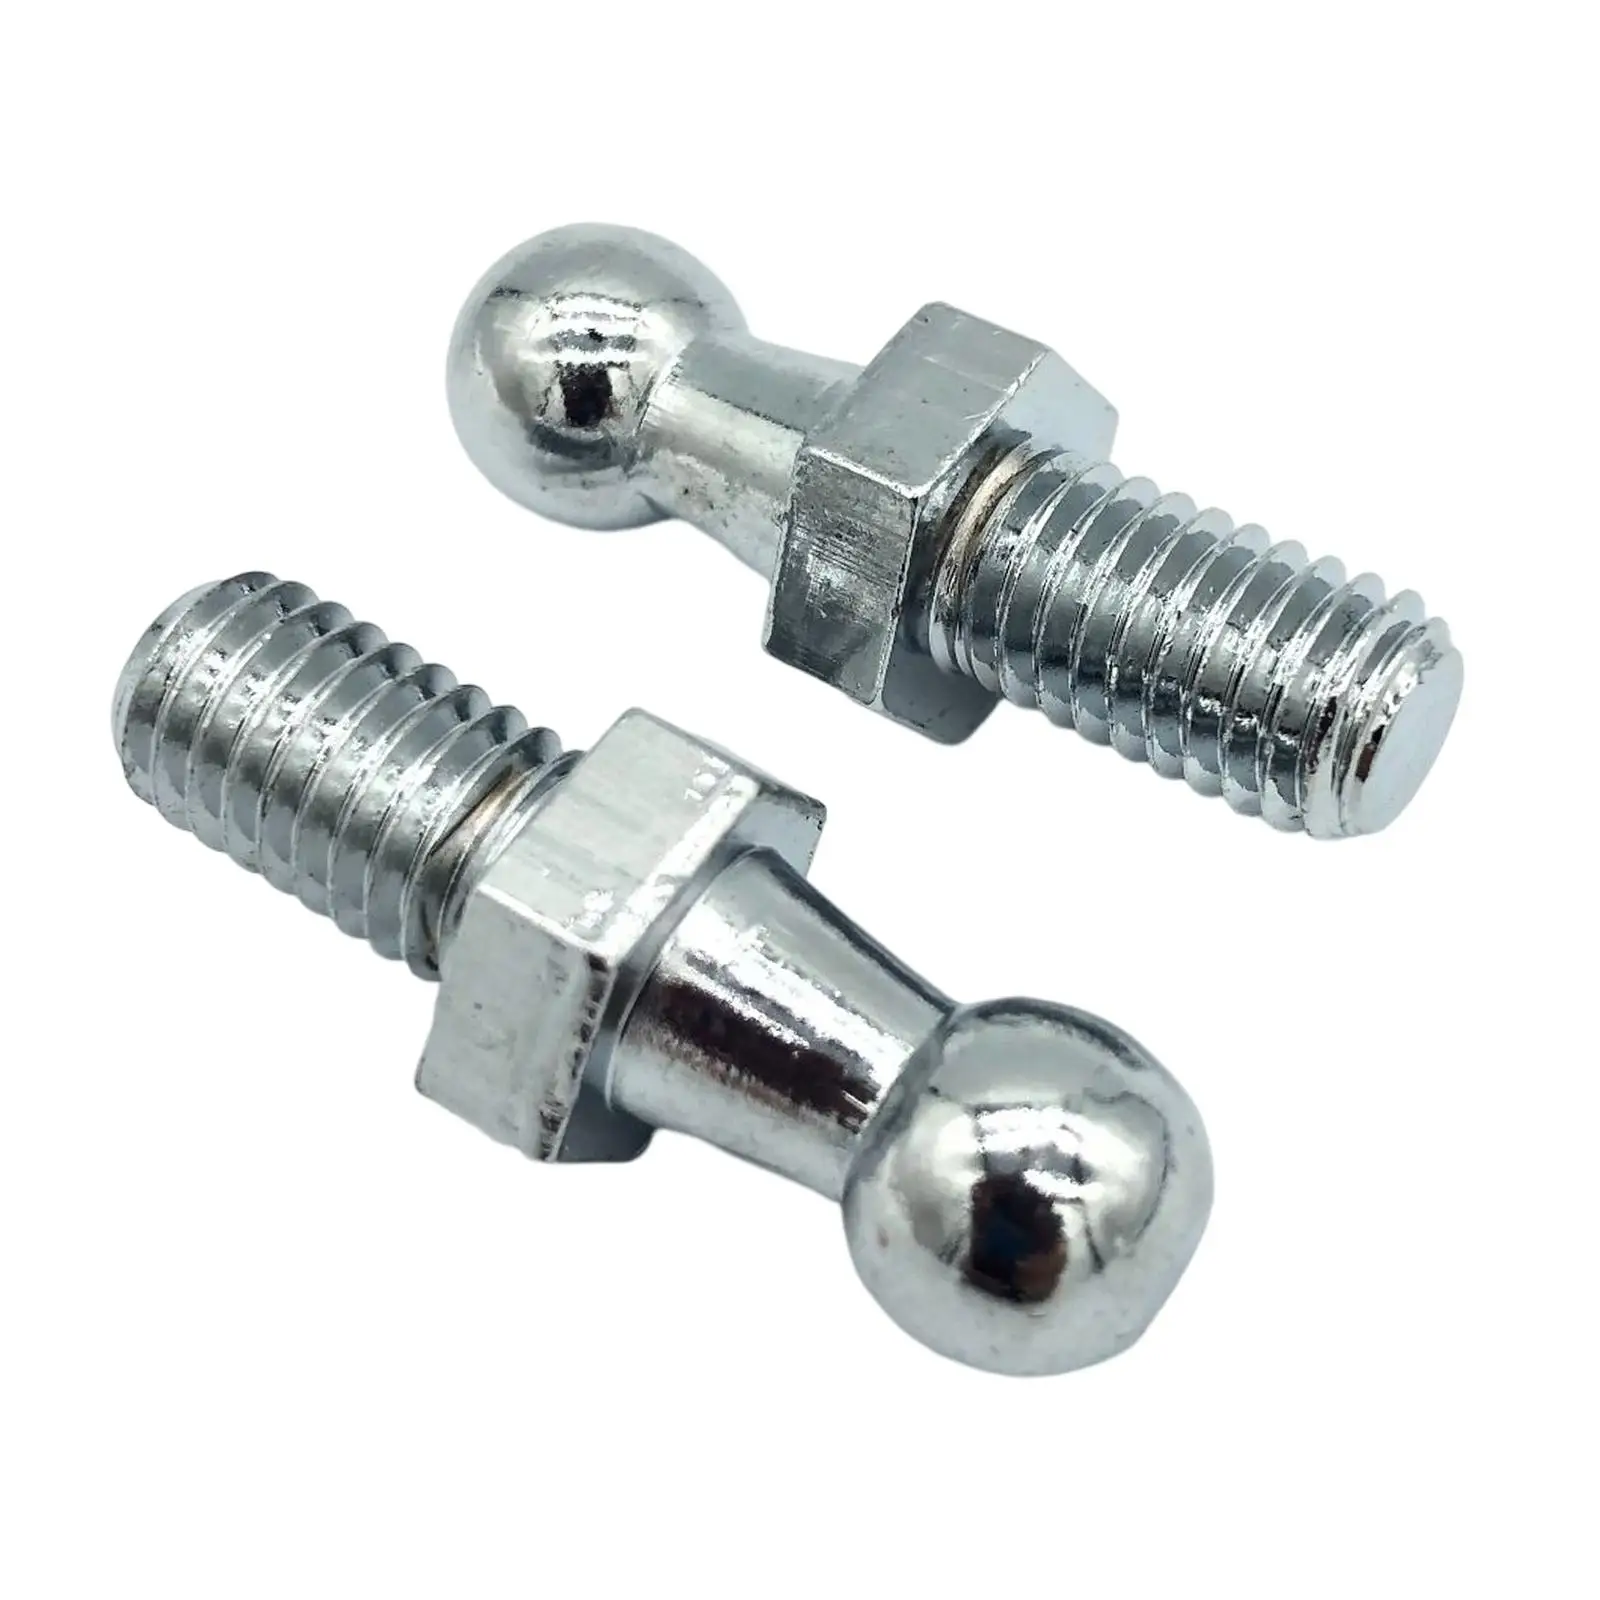 2Pcs Ball Stud Pin Bolt Replacement Gas Strut End Fittings Easy Installation